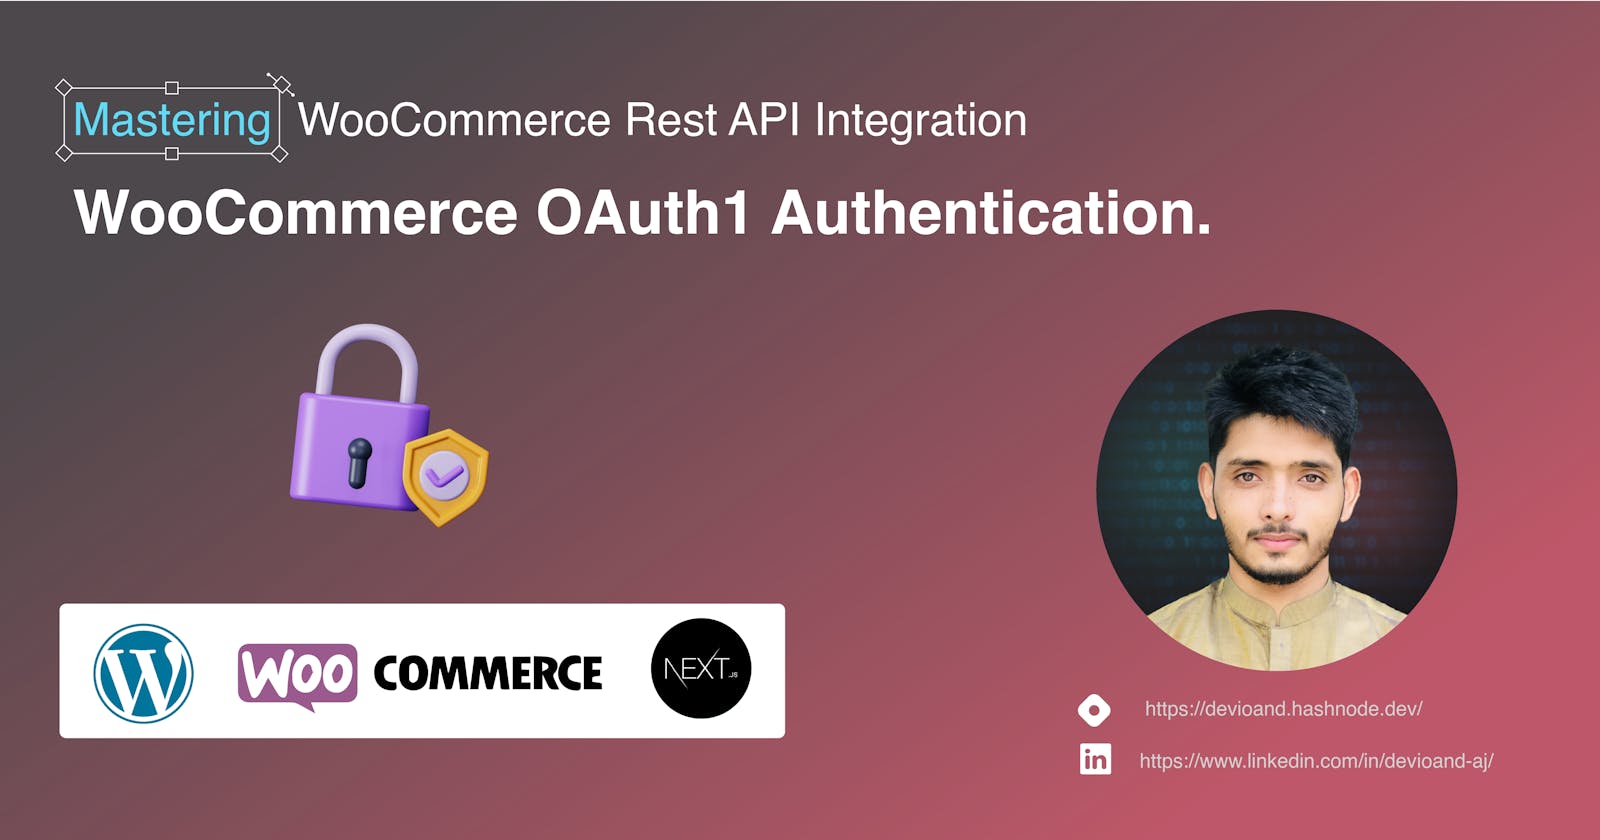 Mastering WooCommerce API Integration: A Comprehensive Guide to Secure OAuth1 Authentication in Next.js